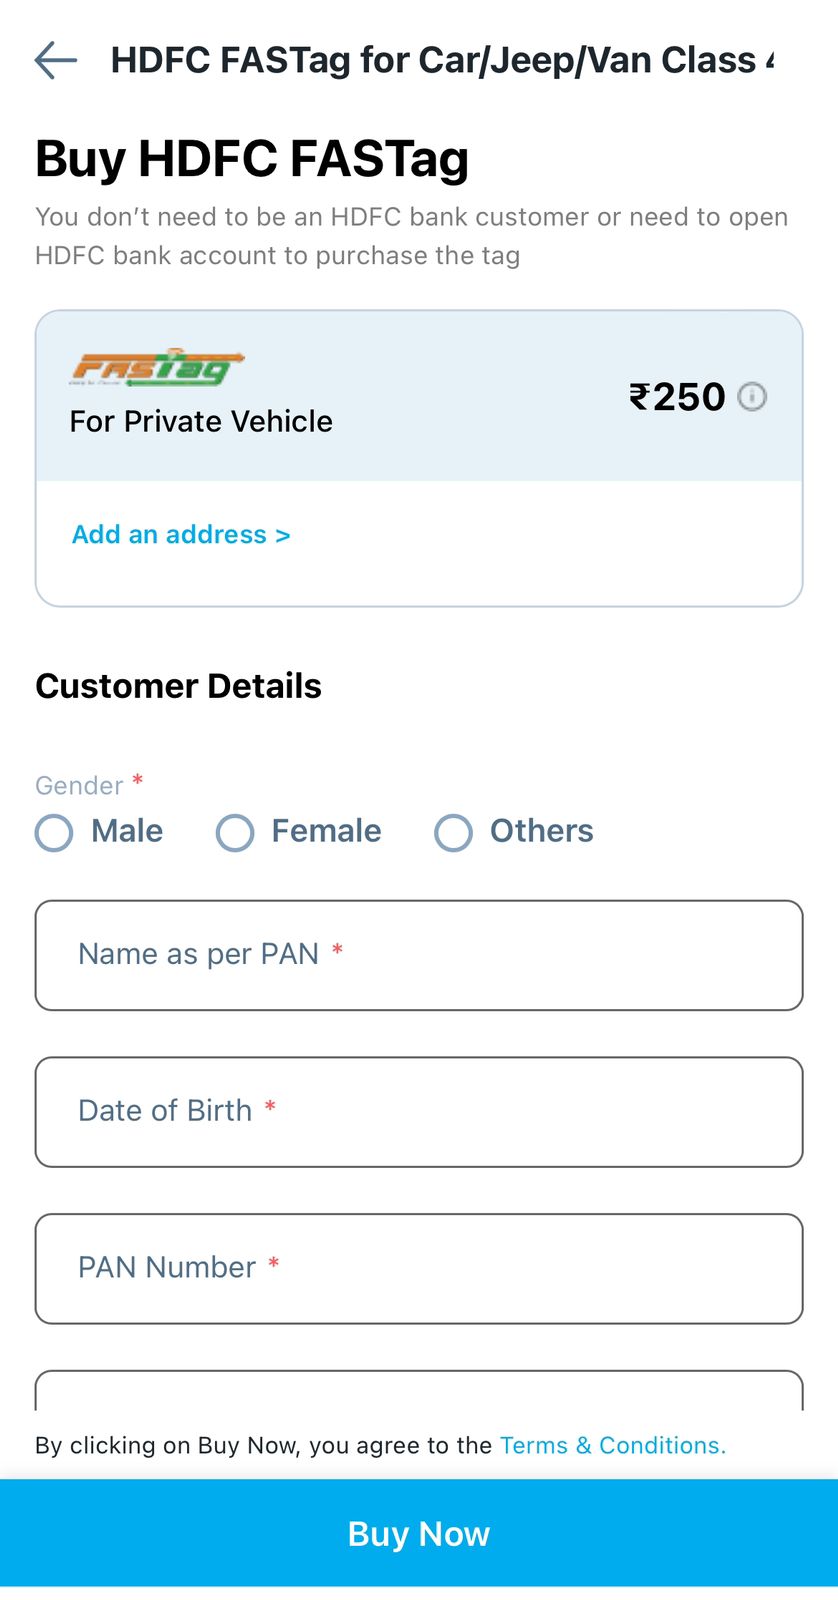 How to buy FASTag from Paytm